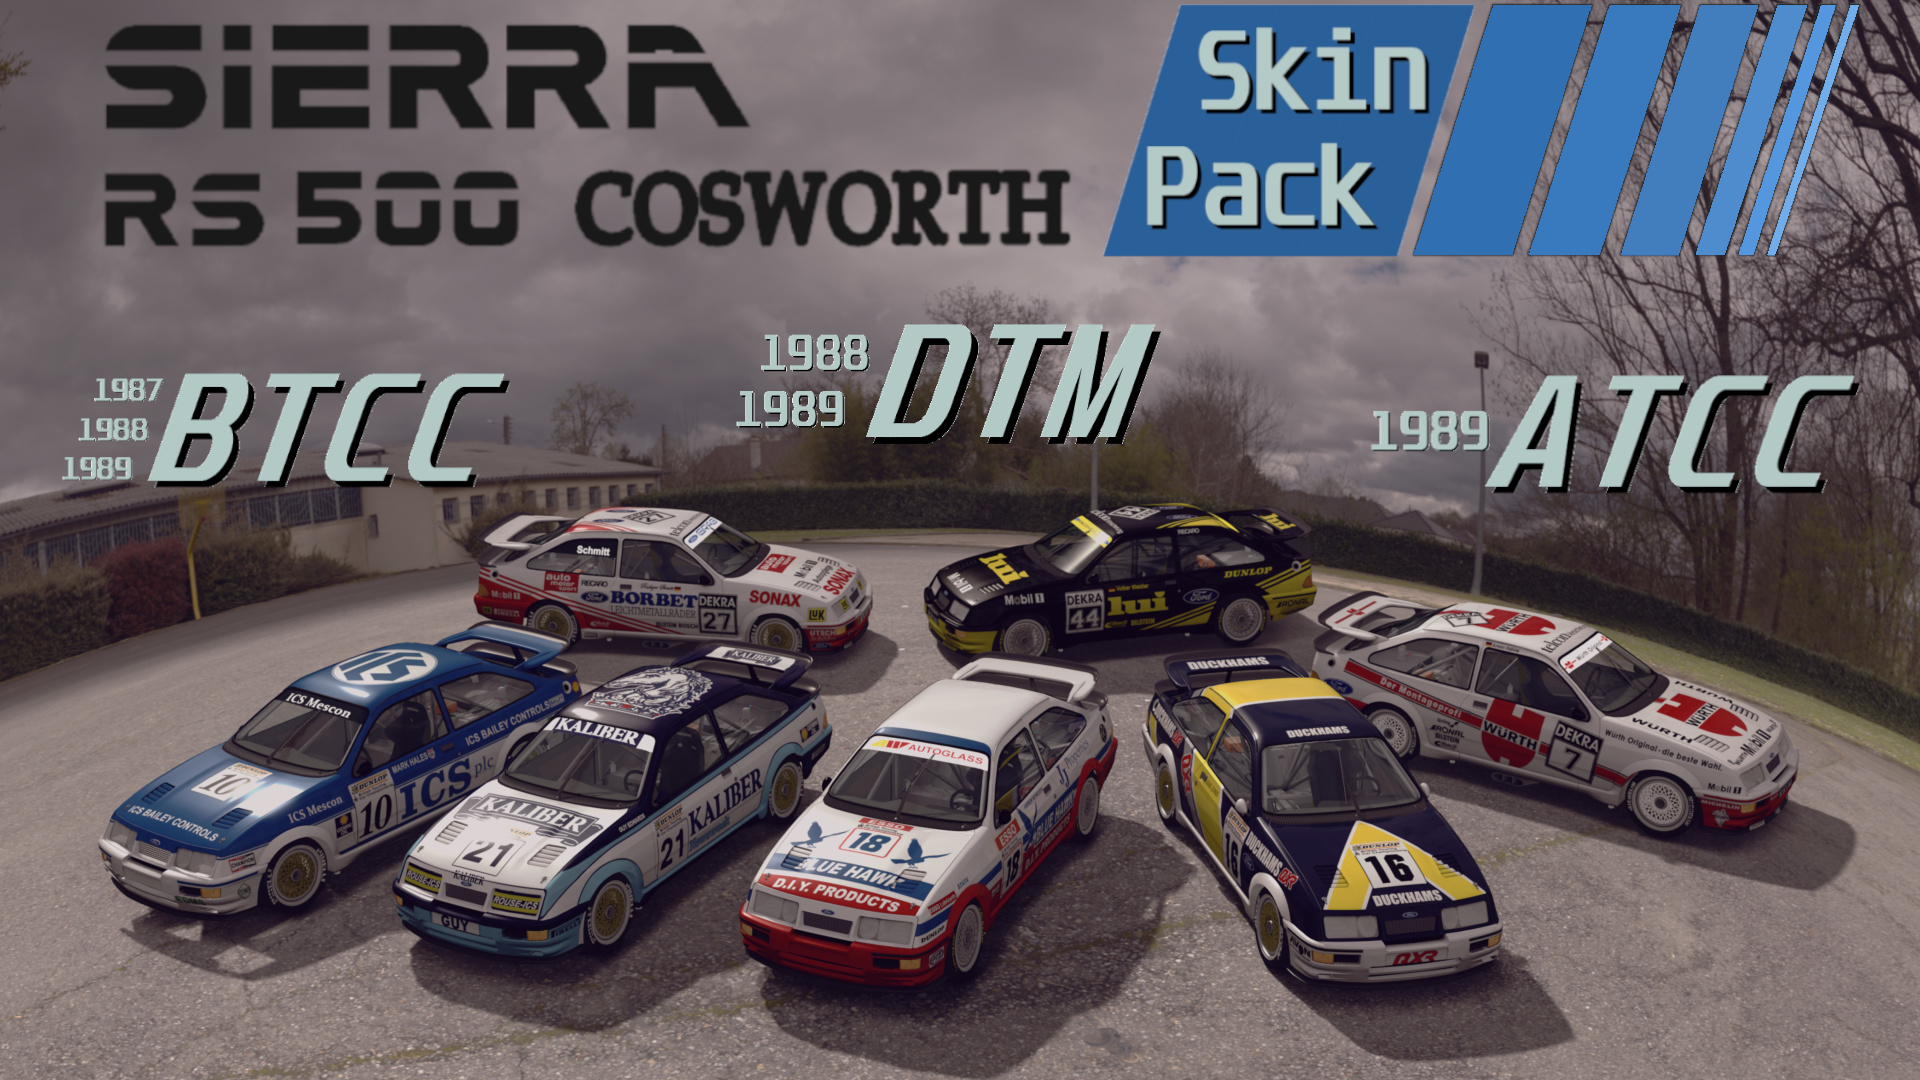 RS500 skin pack picture.jpg